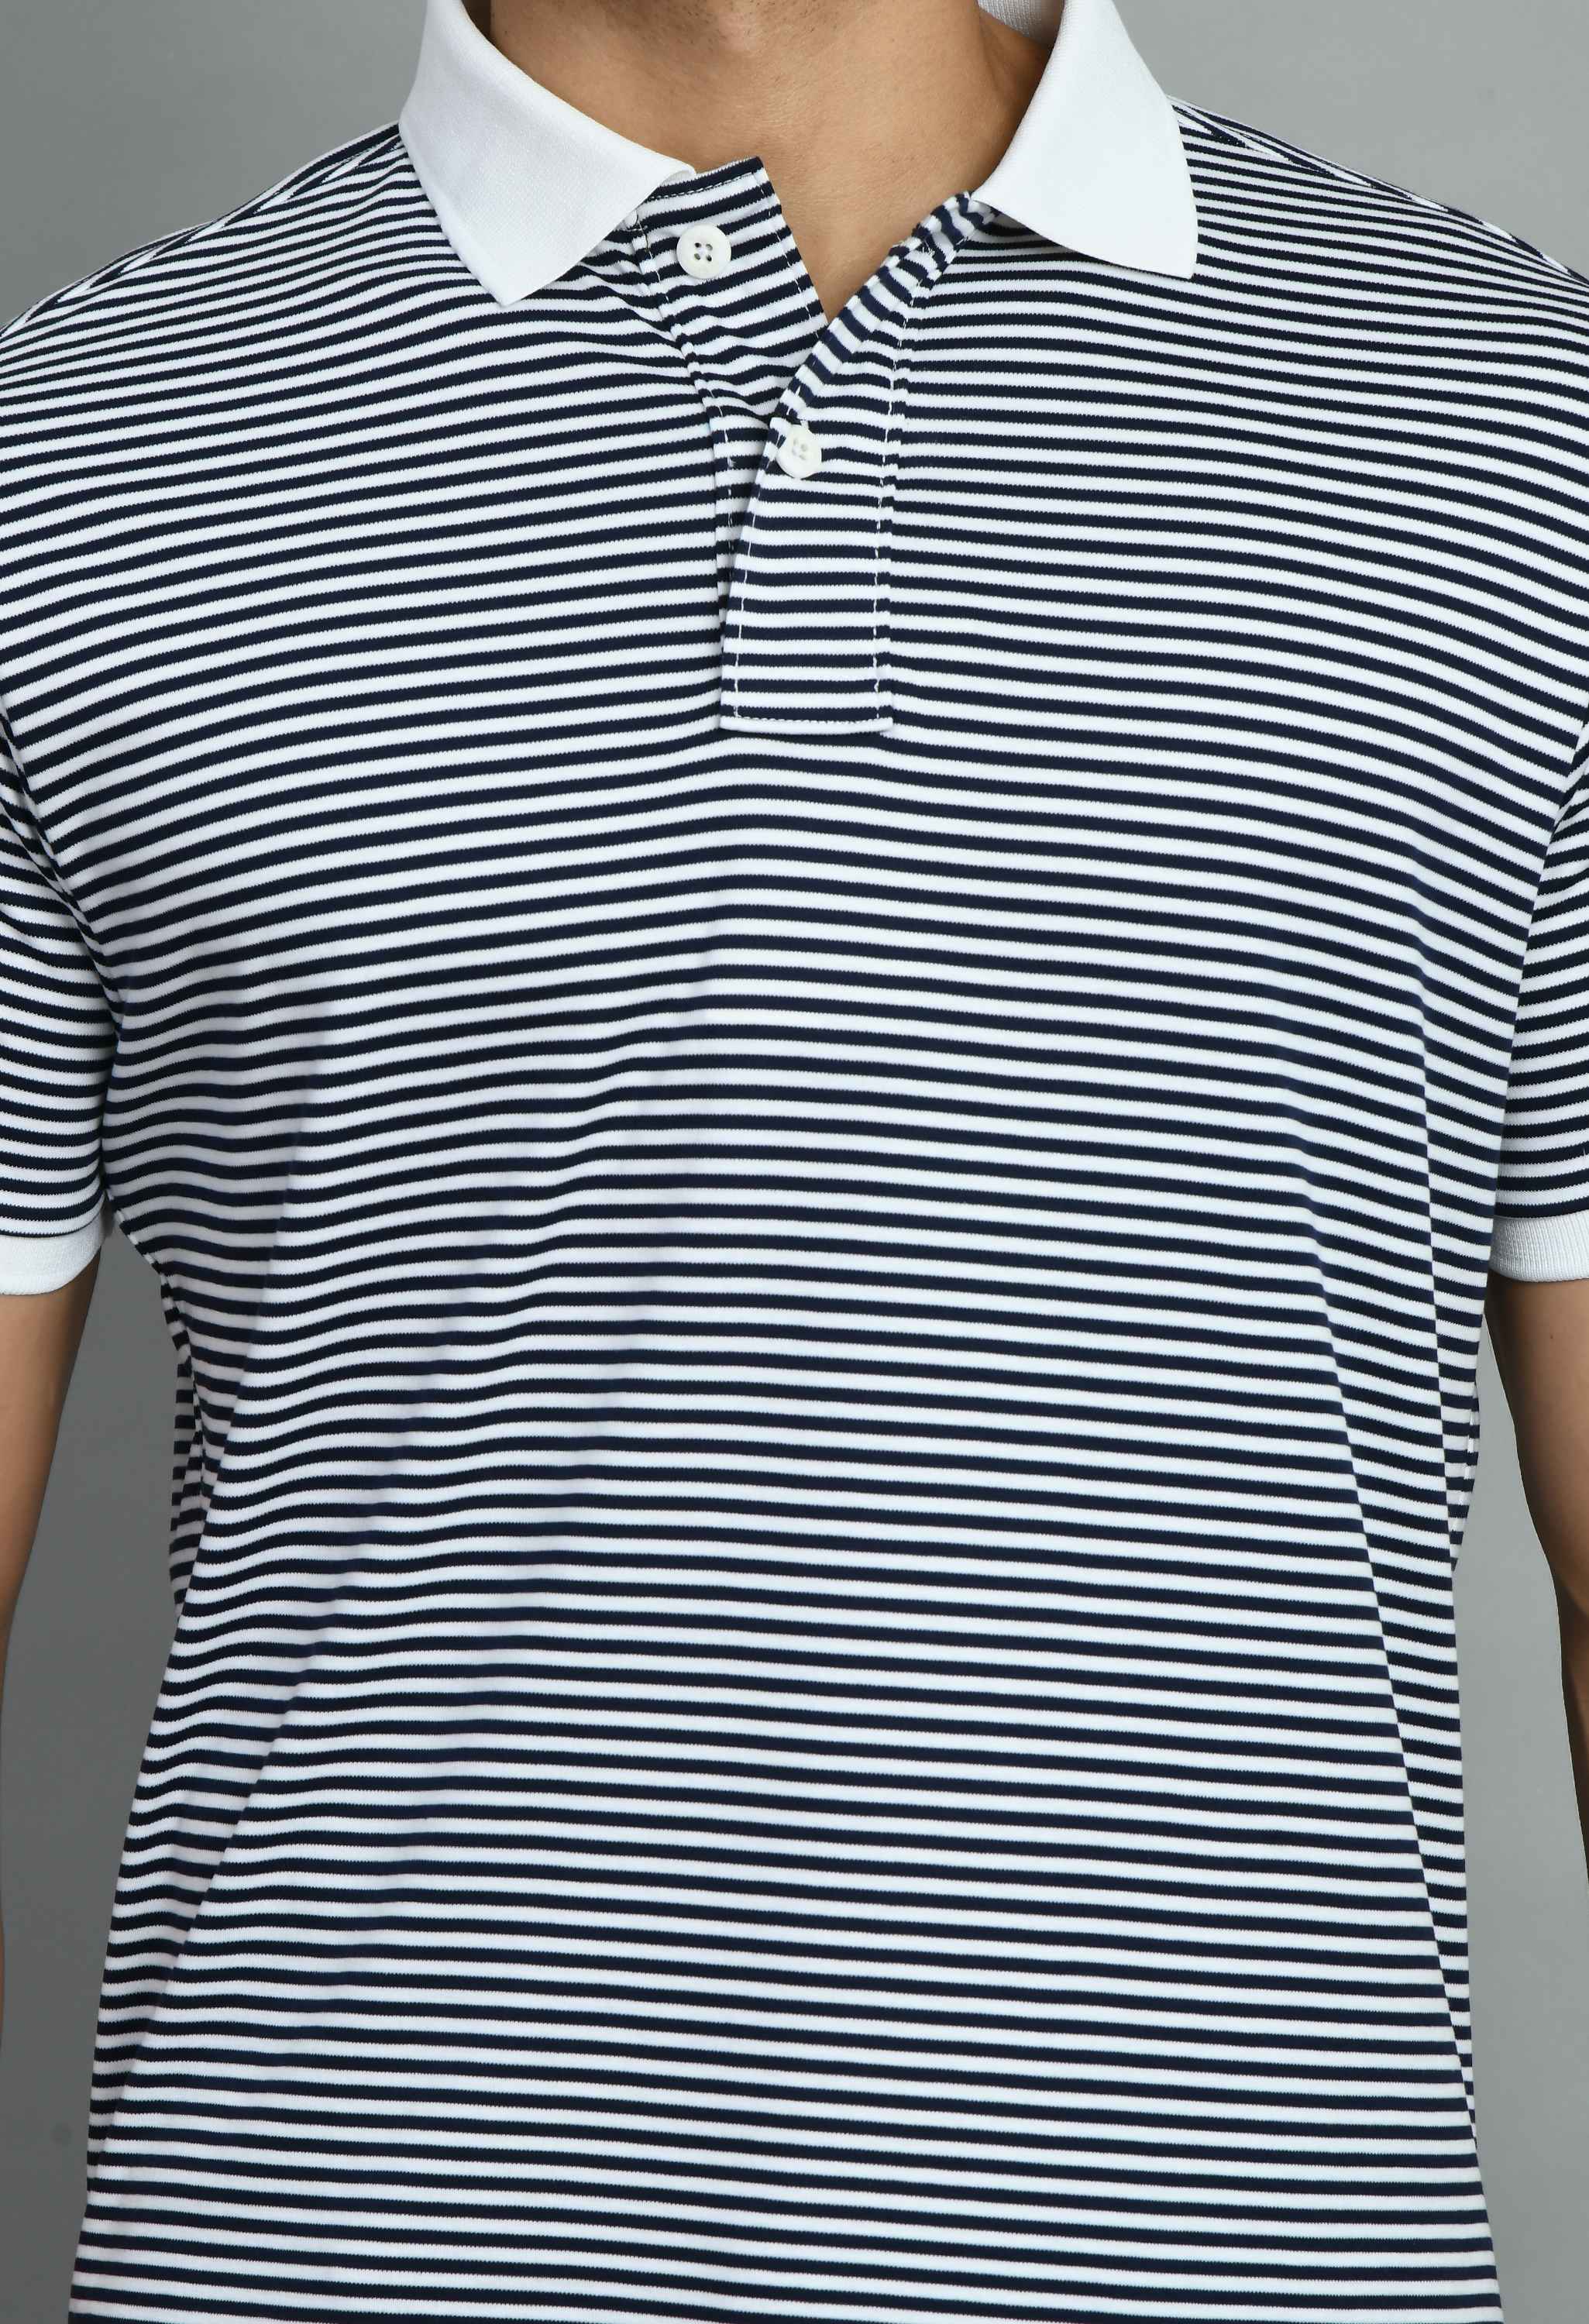 Men's Striped White Navy Smart Fit Polo Tees - SQUIREHOOD